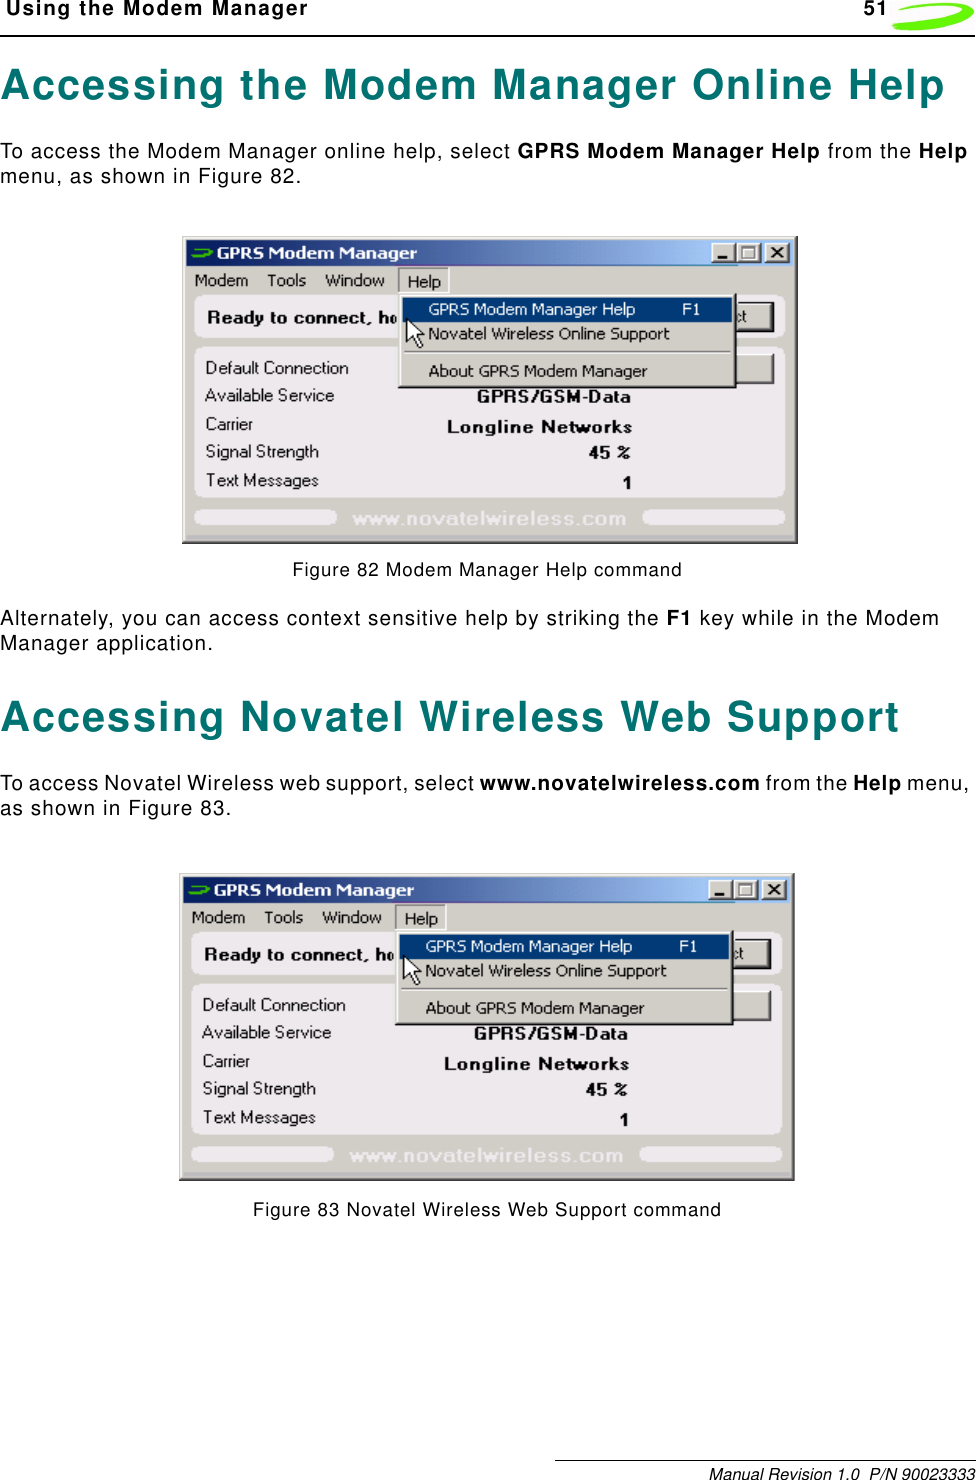  Using the Modem Manager 51Manual Revision 1.0  P/N 90023333Accessing the Modem Manager Online HelpTo access the Modem Manager online help, select GPRS Modem Manager Help from the Help menu, as shown in Figure 82. Figure 82 Modem Manager Help commandAlternately, you can access context sensitive help by striking the F1 key while in the Modem Manager application.Accessing Novatel Wireless Web SupportTo access Novatel Wireless web support, select www.novatelwireless.com from the Help menu, as shown in Figure 83.Figure 83 Novatel Wireless Web Support command